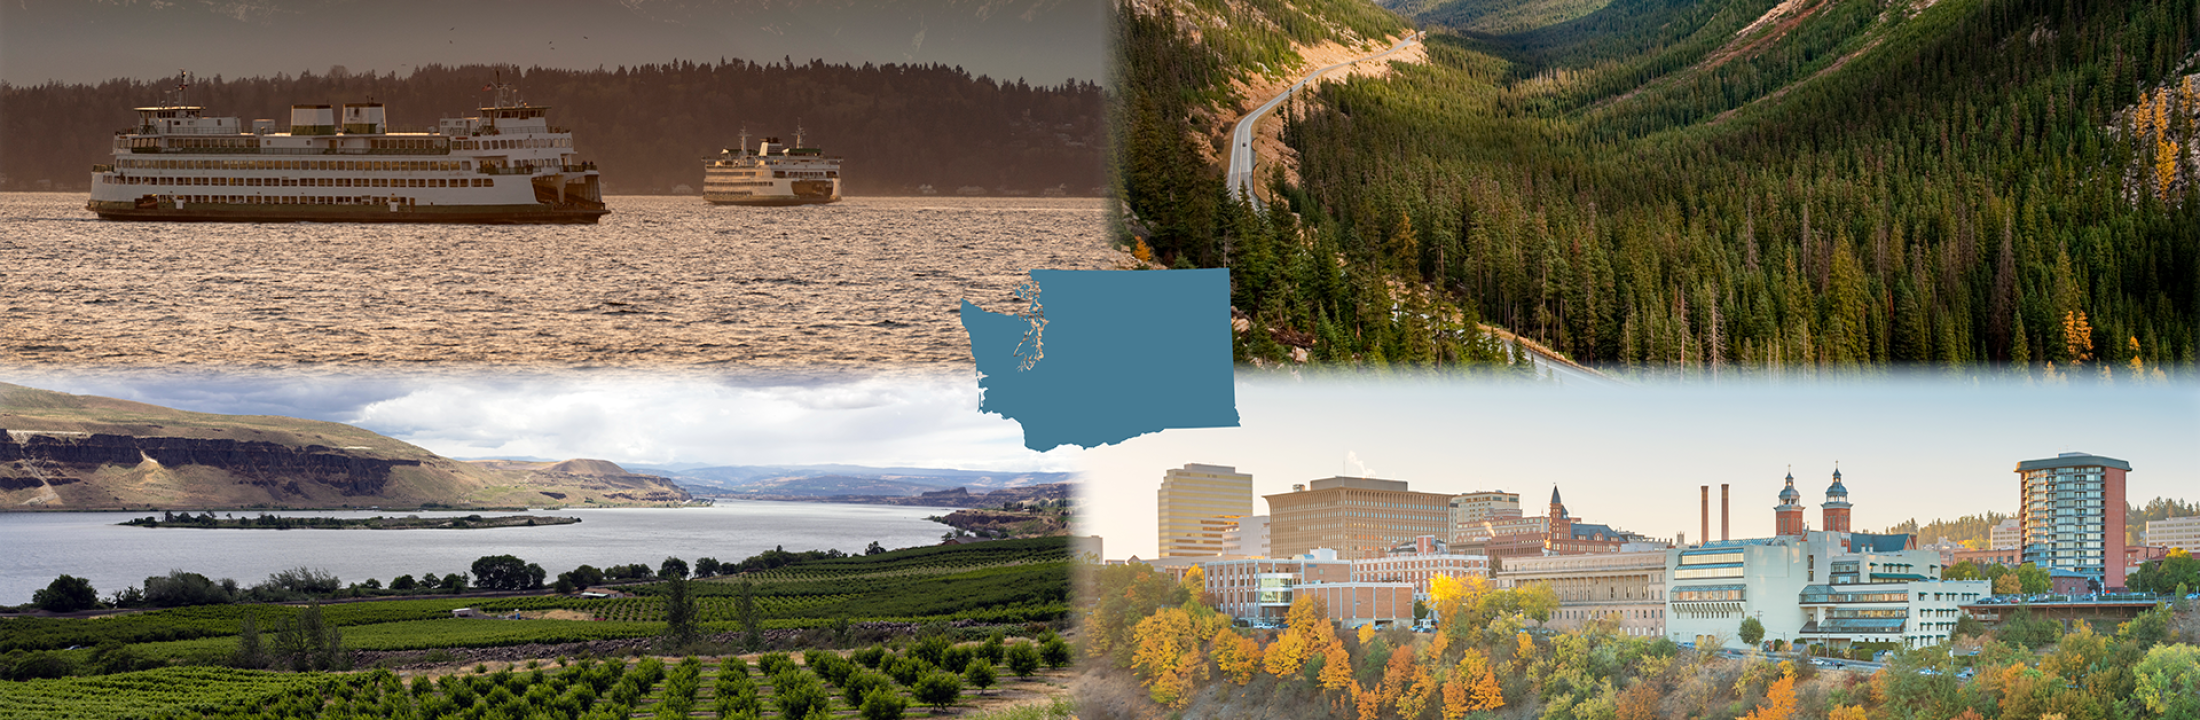 scenic landscape images of washington state representing regional health office presence